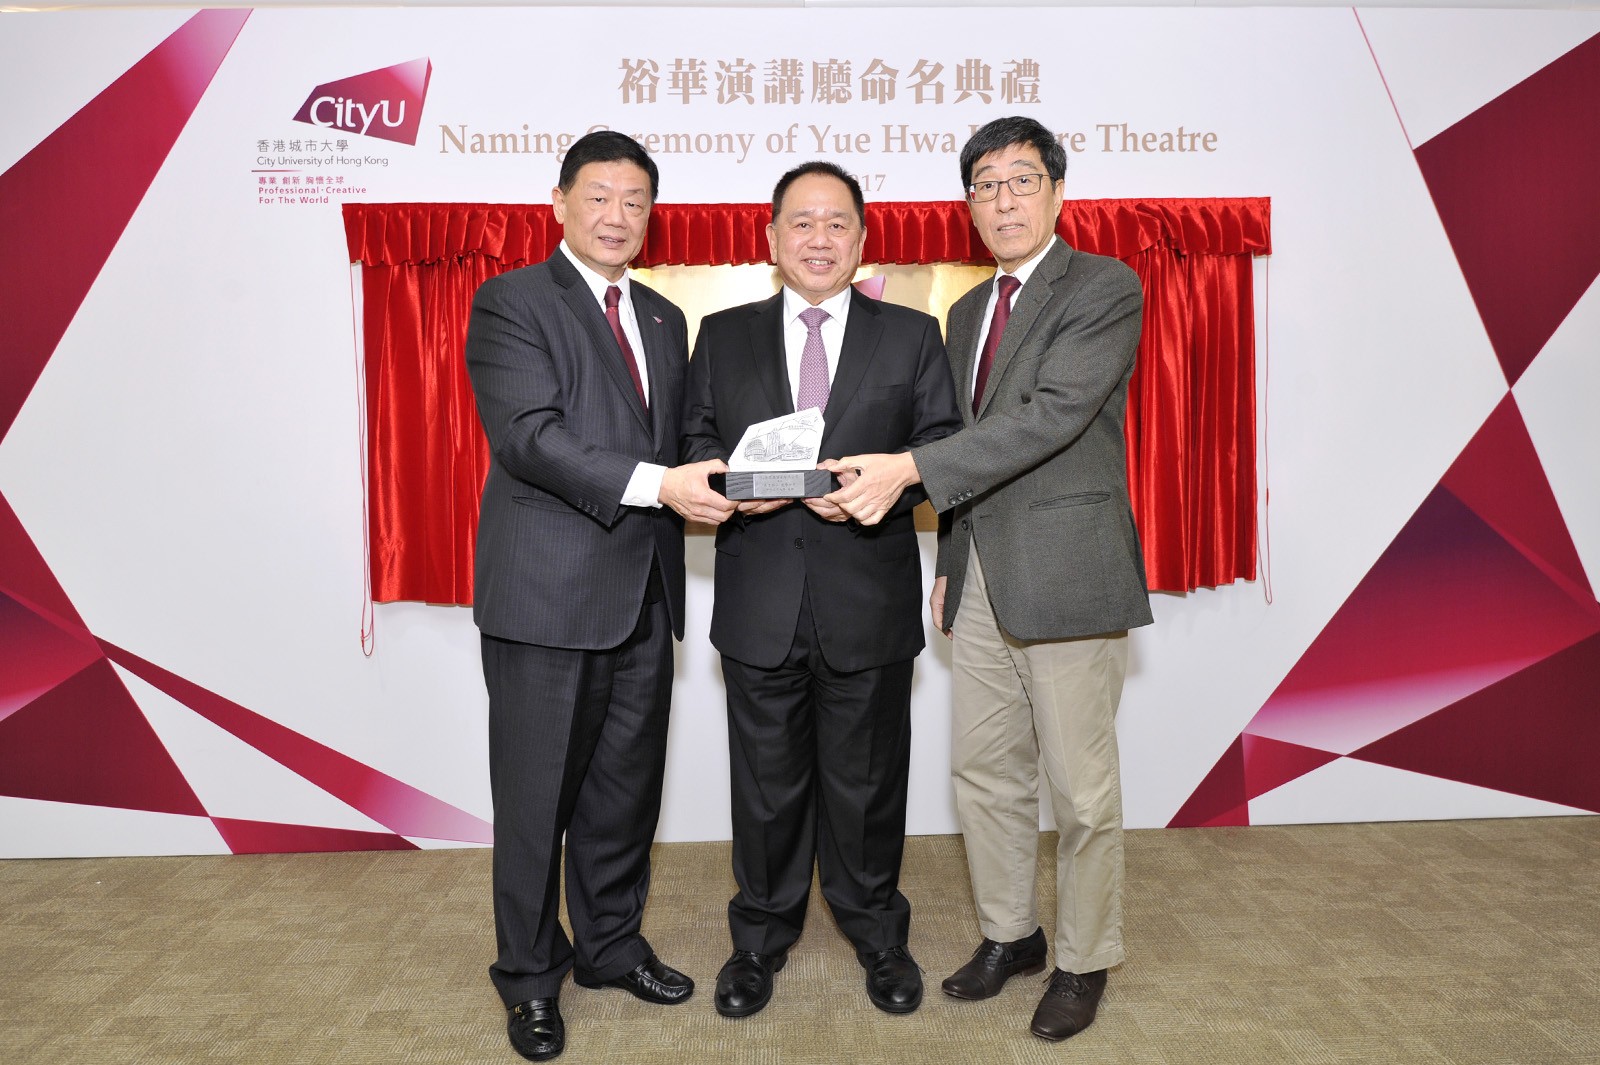 Mr Hu (left) and Professor Kuo (right) present a souvenir to Dr Yu.